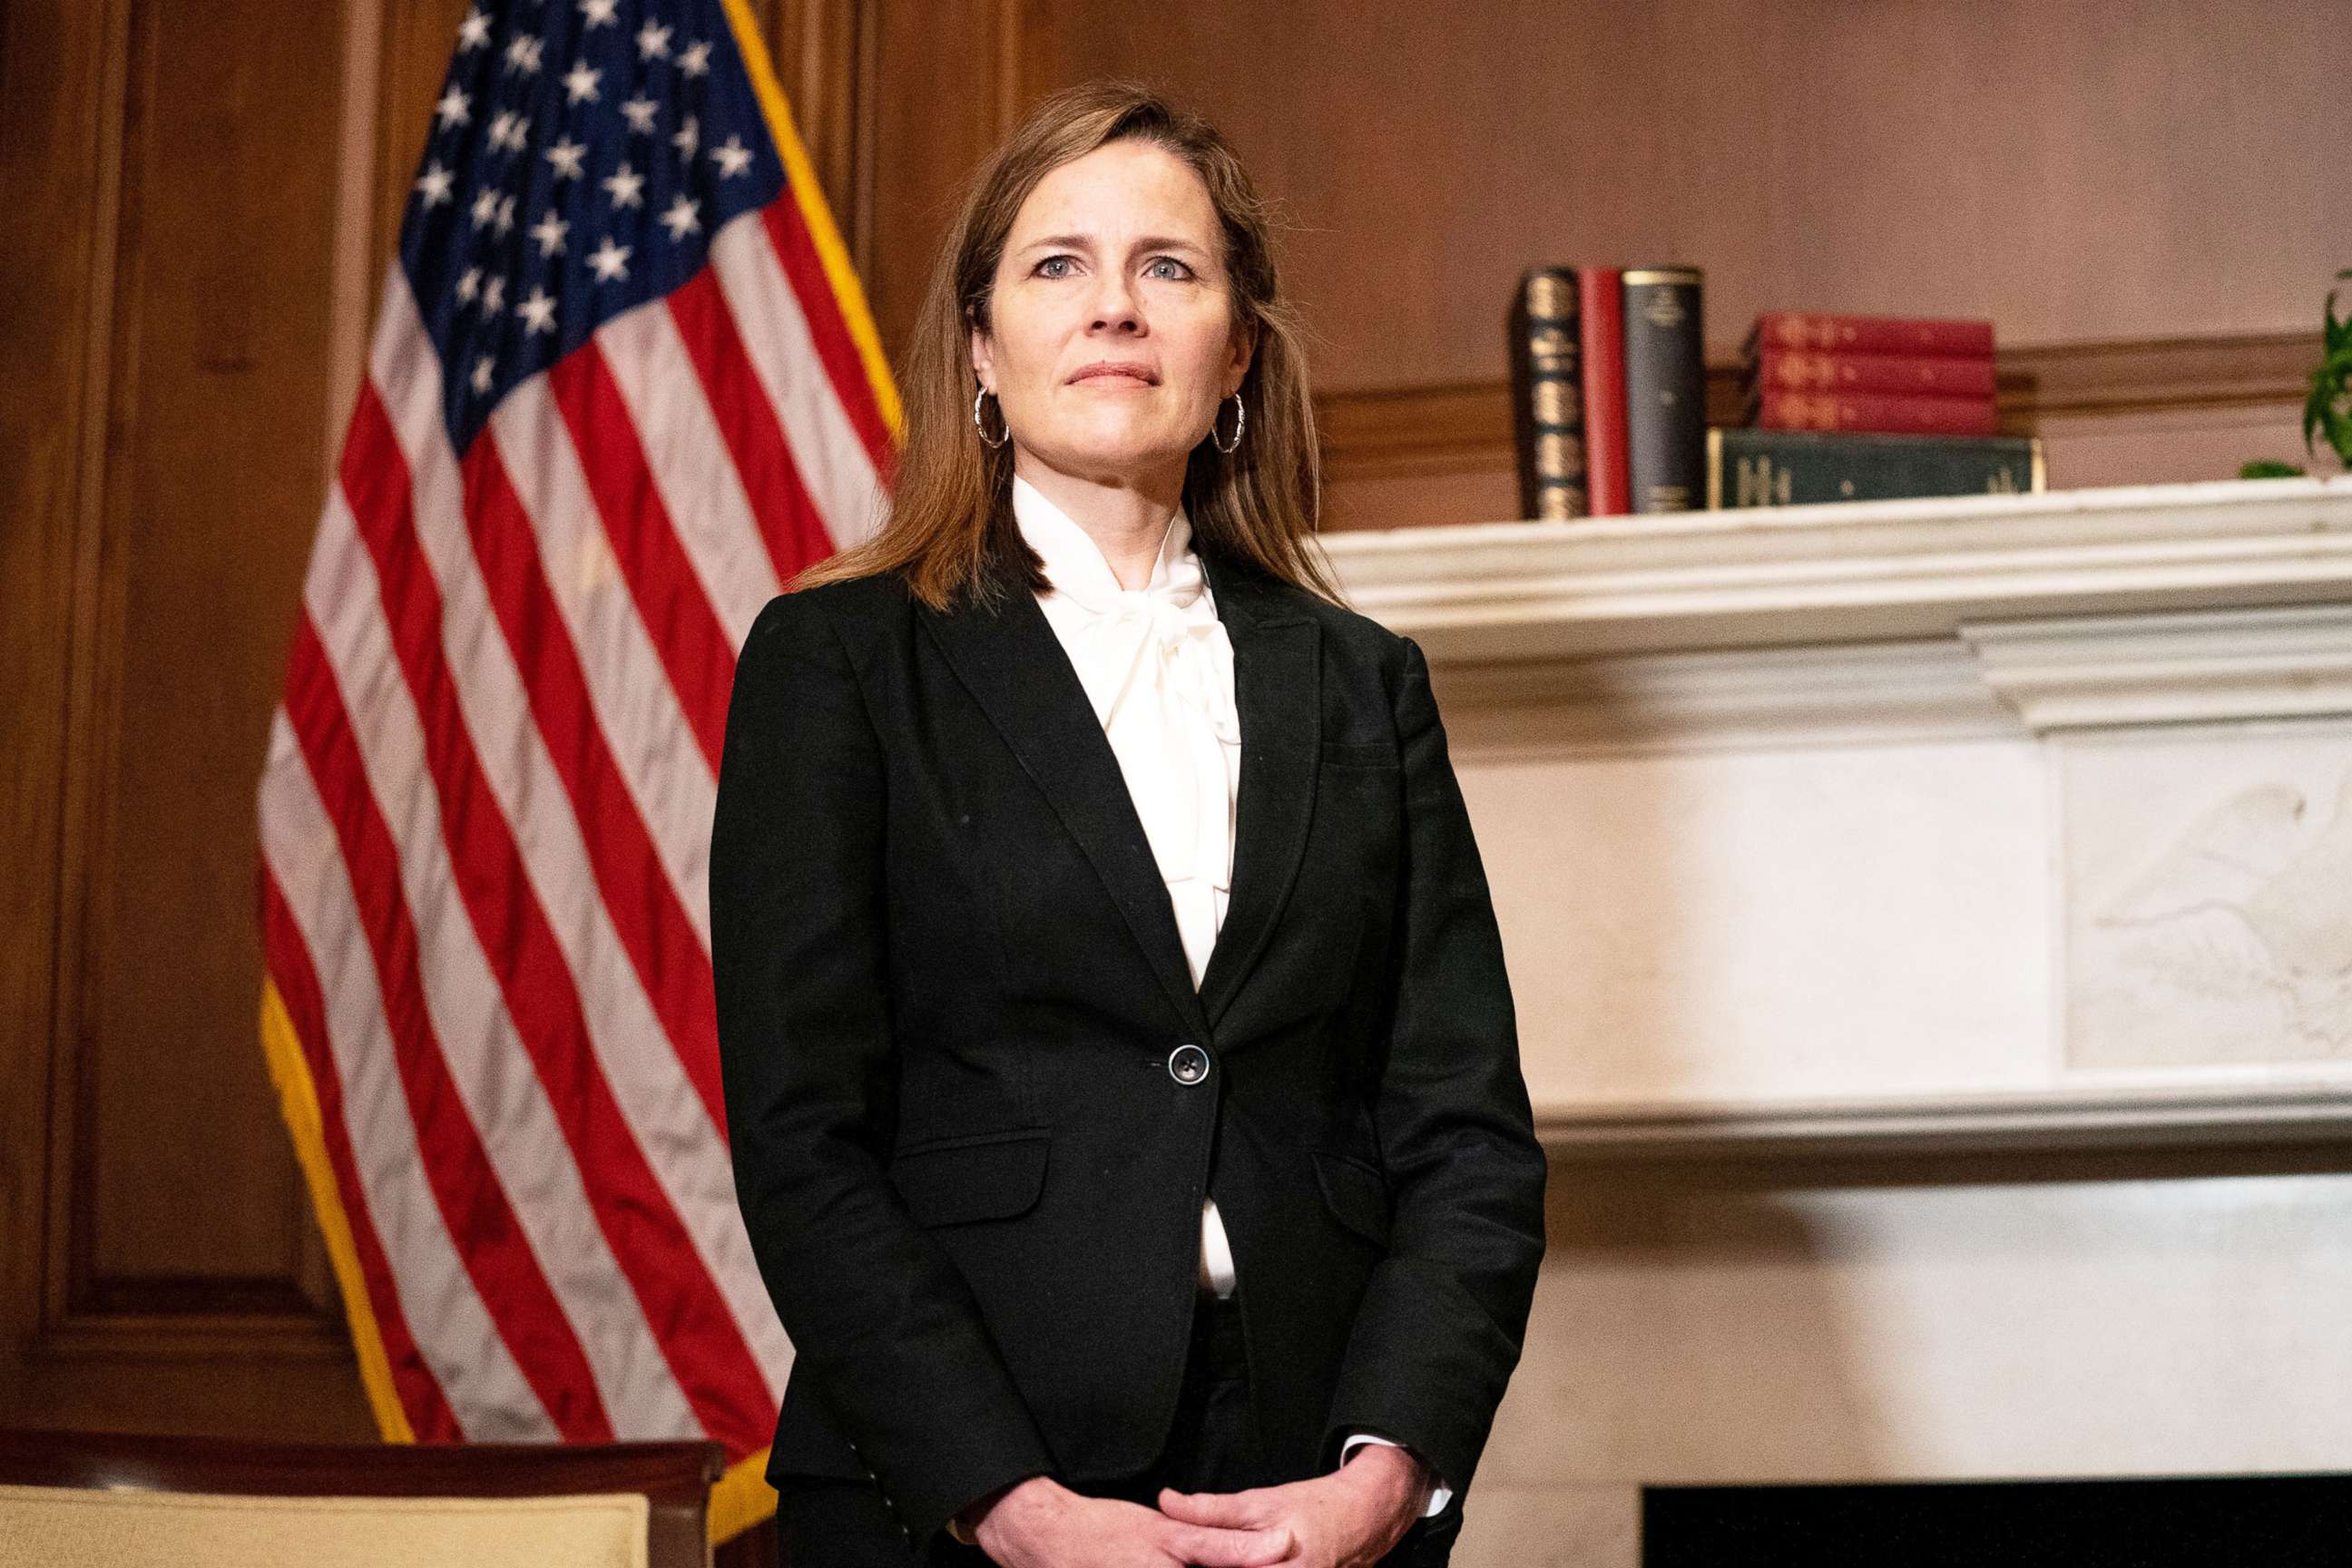 PHOTO: Judge Amy Coney Barrett, President Trump's nominee for Supreme Court, poses for a photo before a meeting in the Capitol, Oct. 1, 2020.